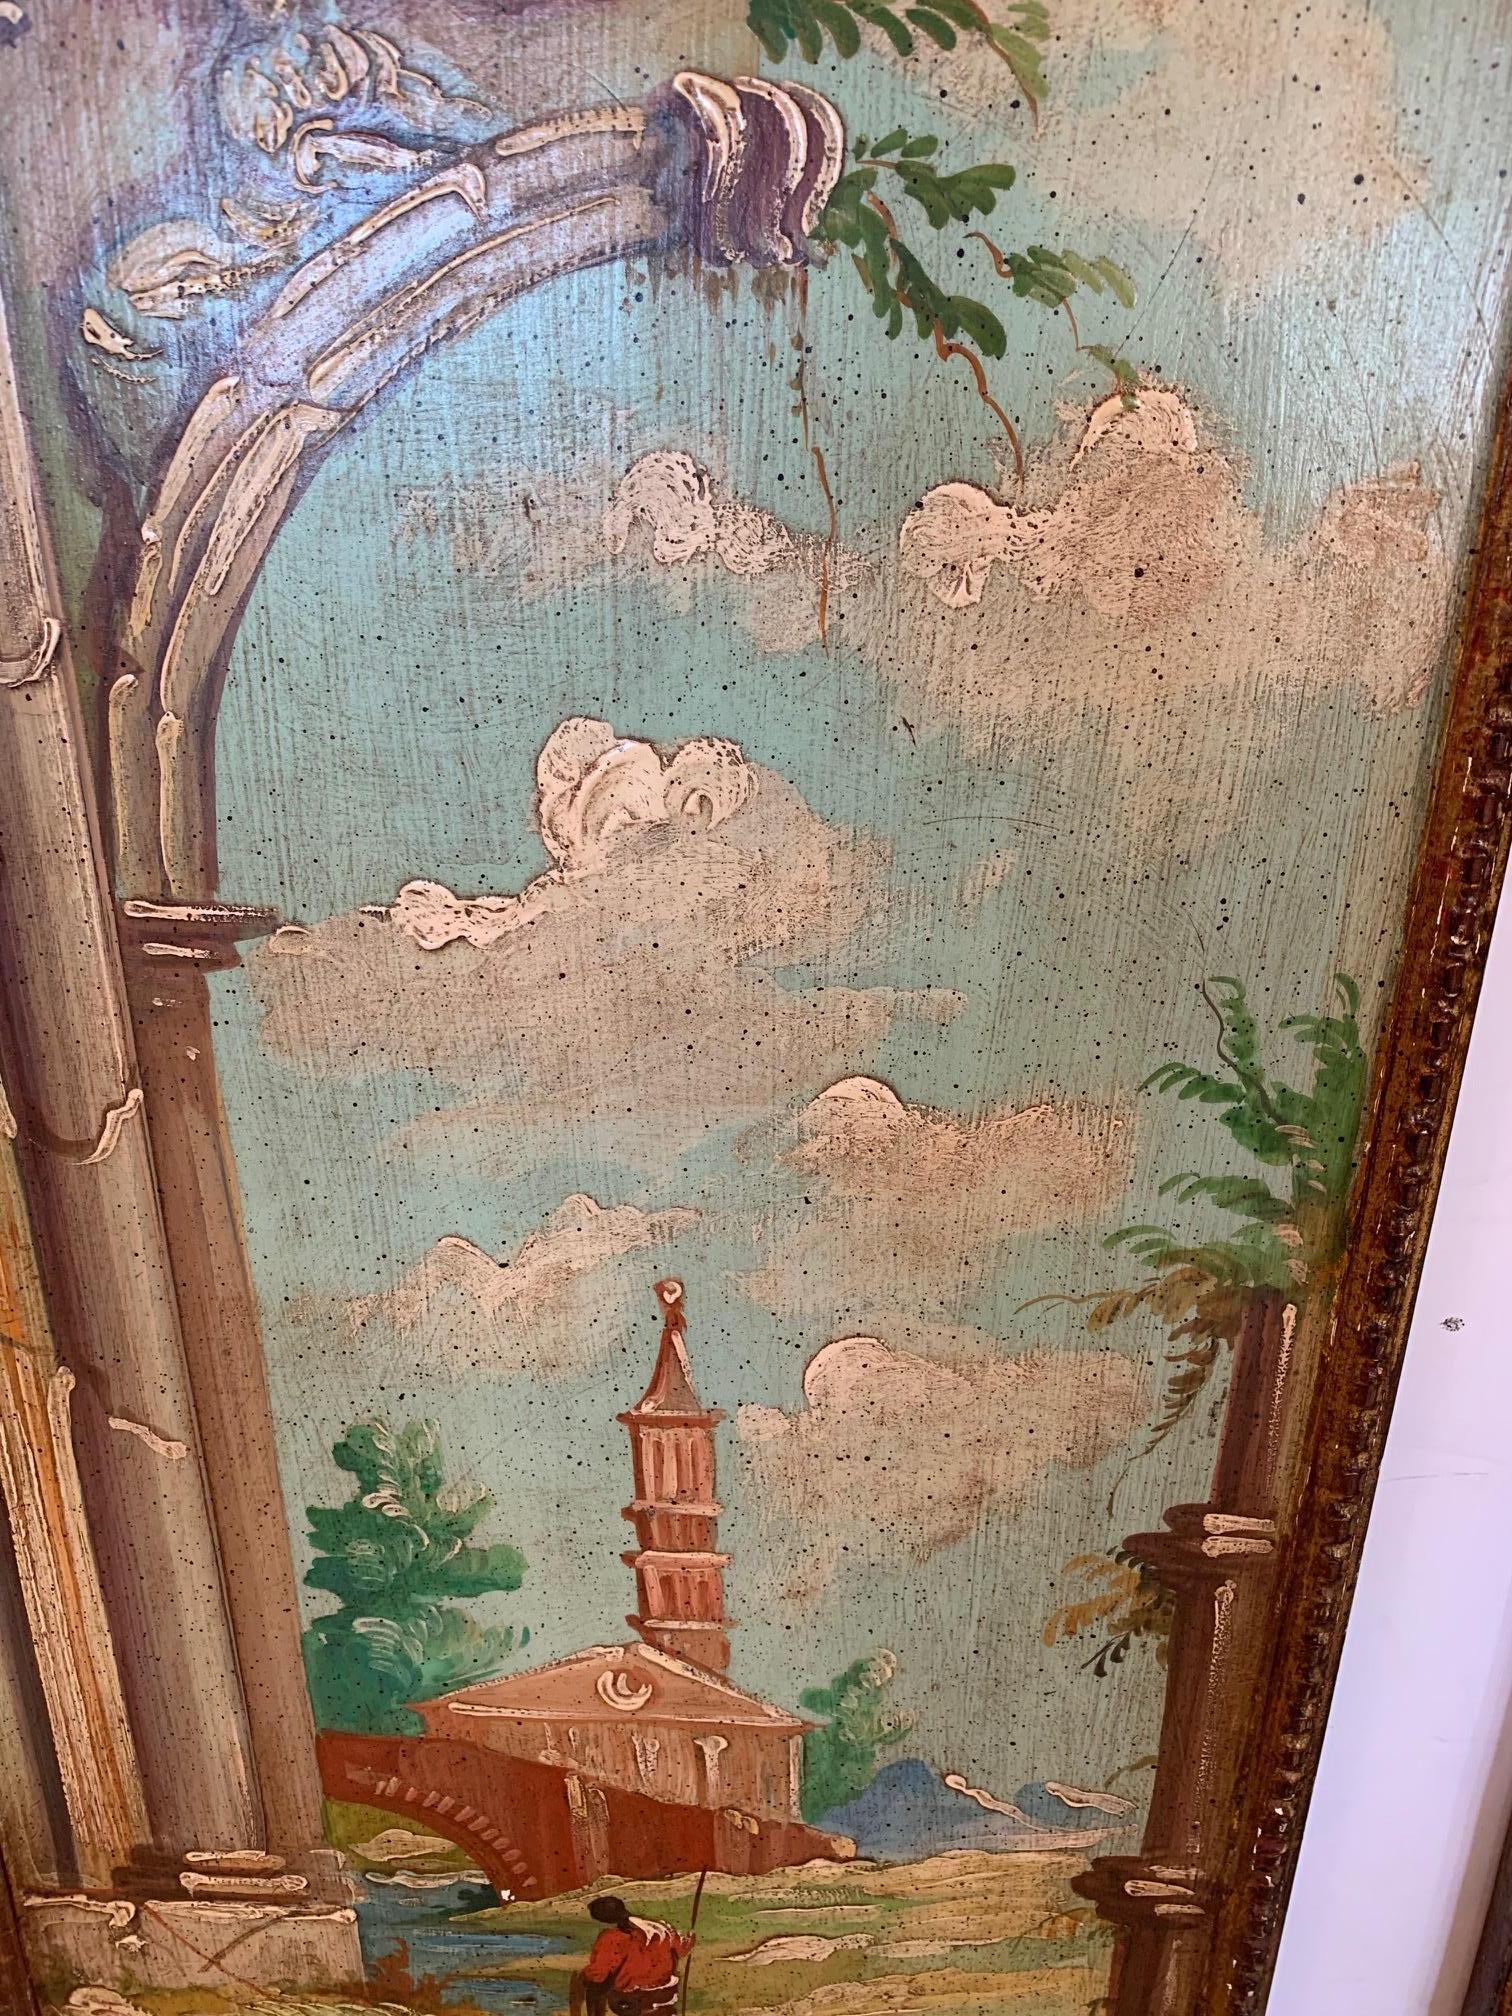 A marvelous pair of Venetian antique hand painted panels having gorgeous color palette with turquoise sky, puffy white clouds and romantic architectural remains that suggest a past glorious time in history. Frames are giltwood and scalloped shaped